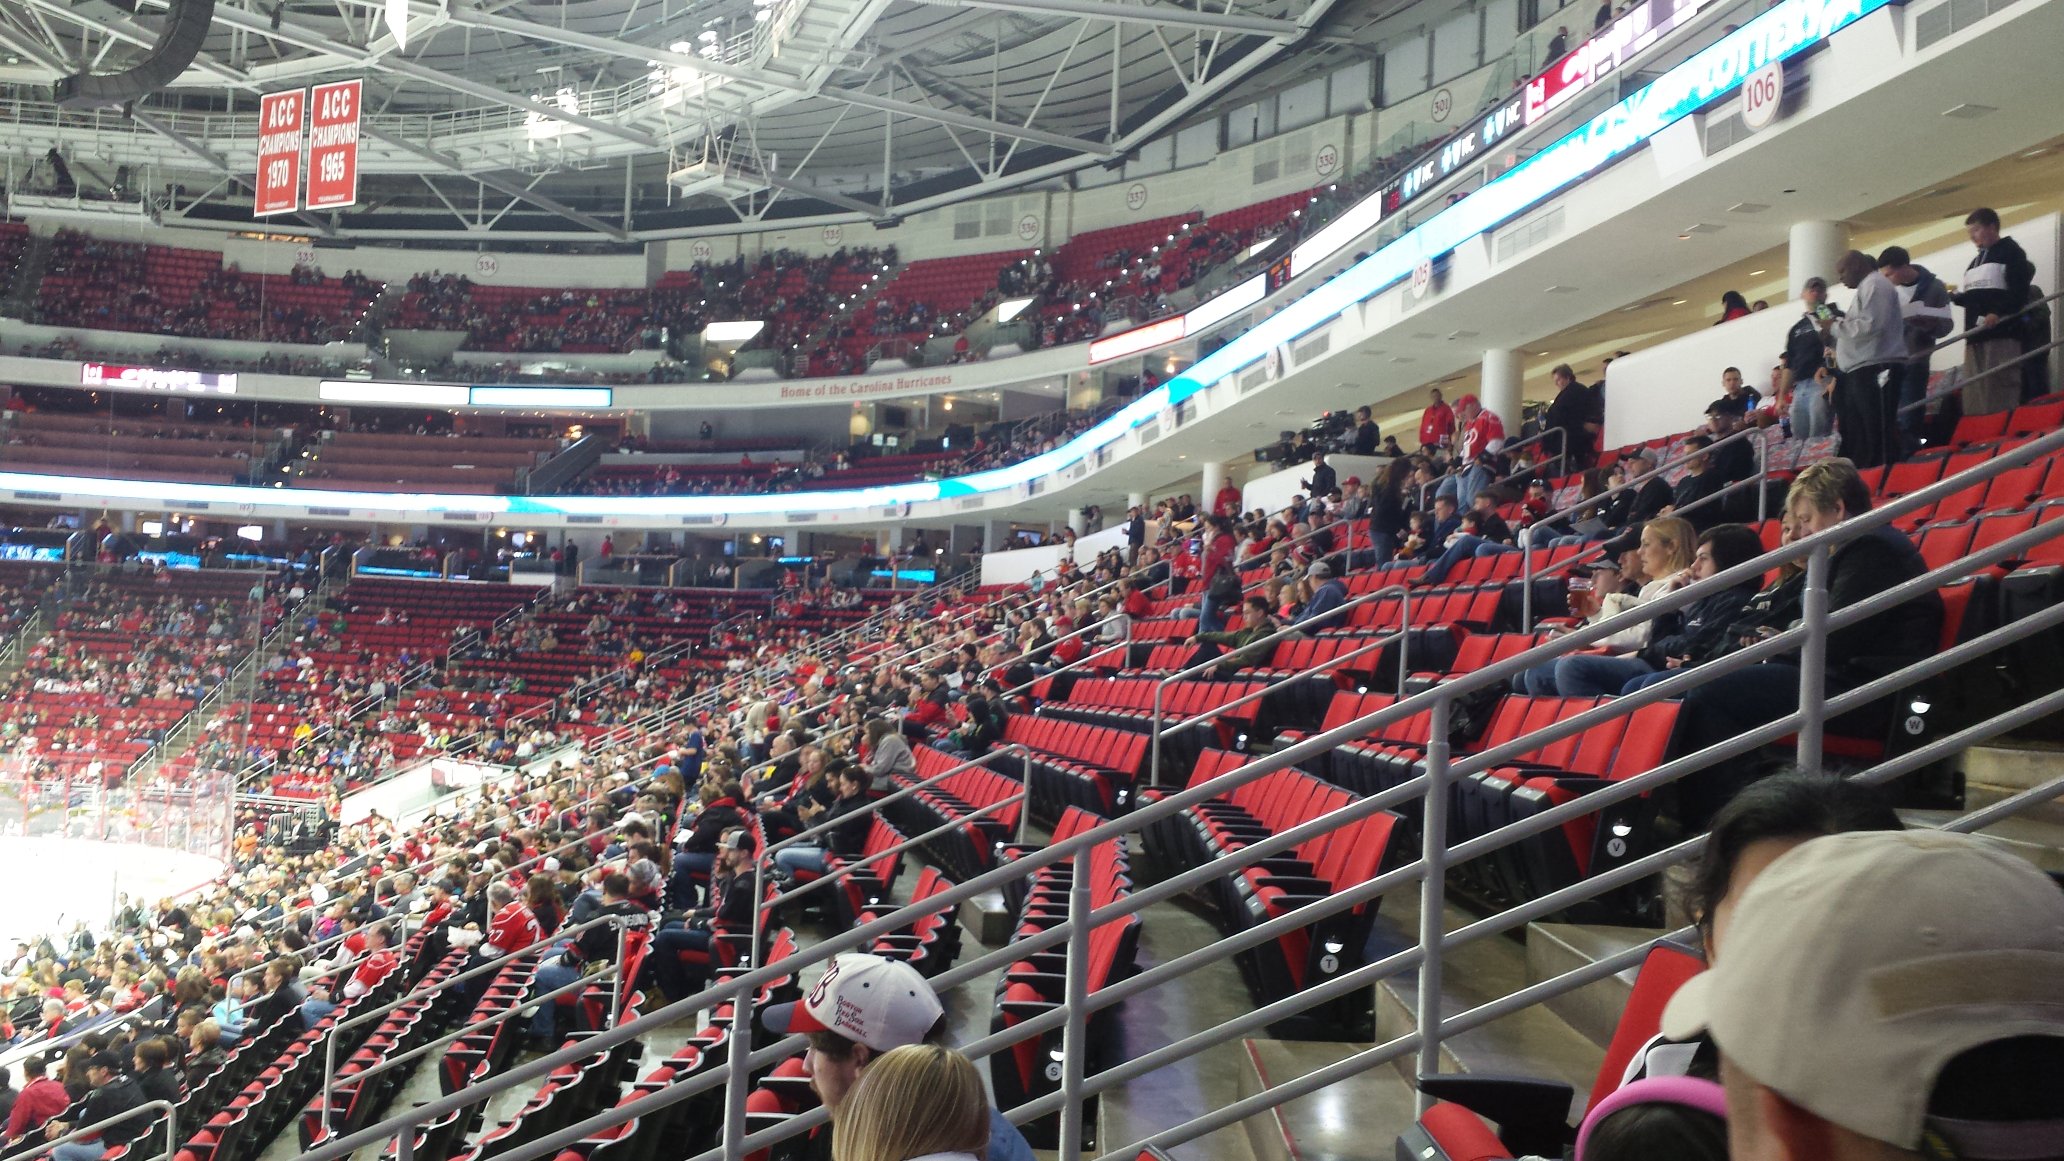 Section 334 at PNC Arena 